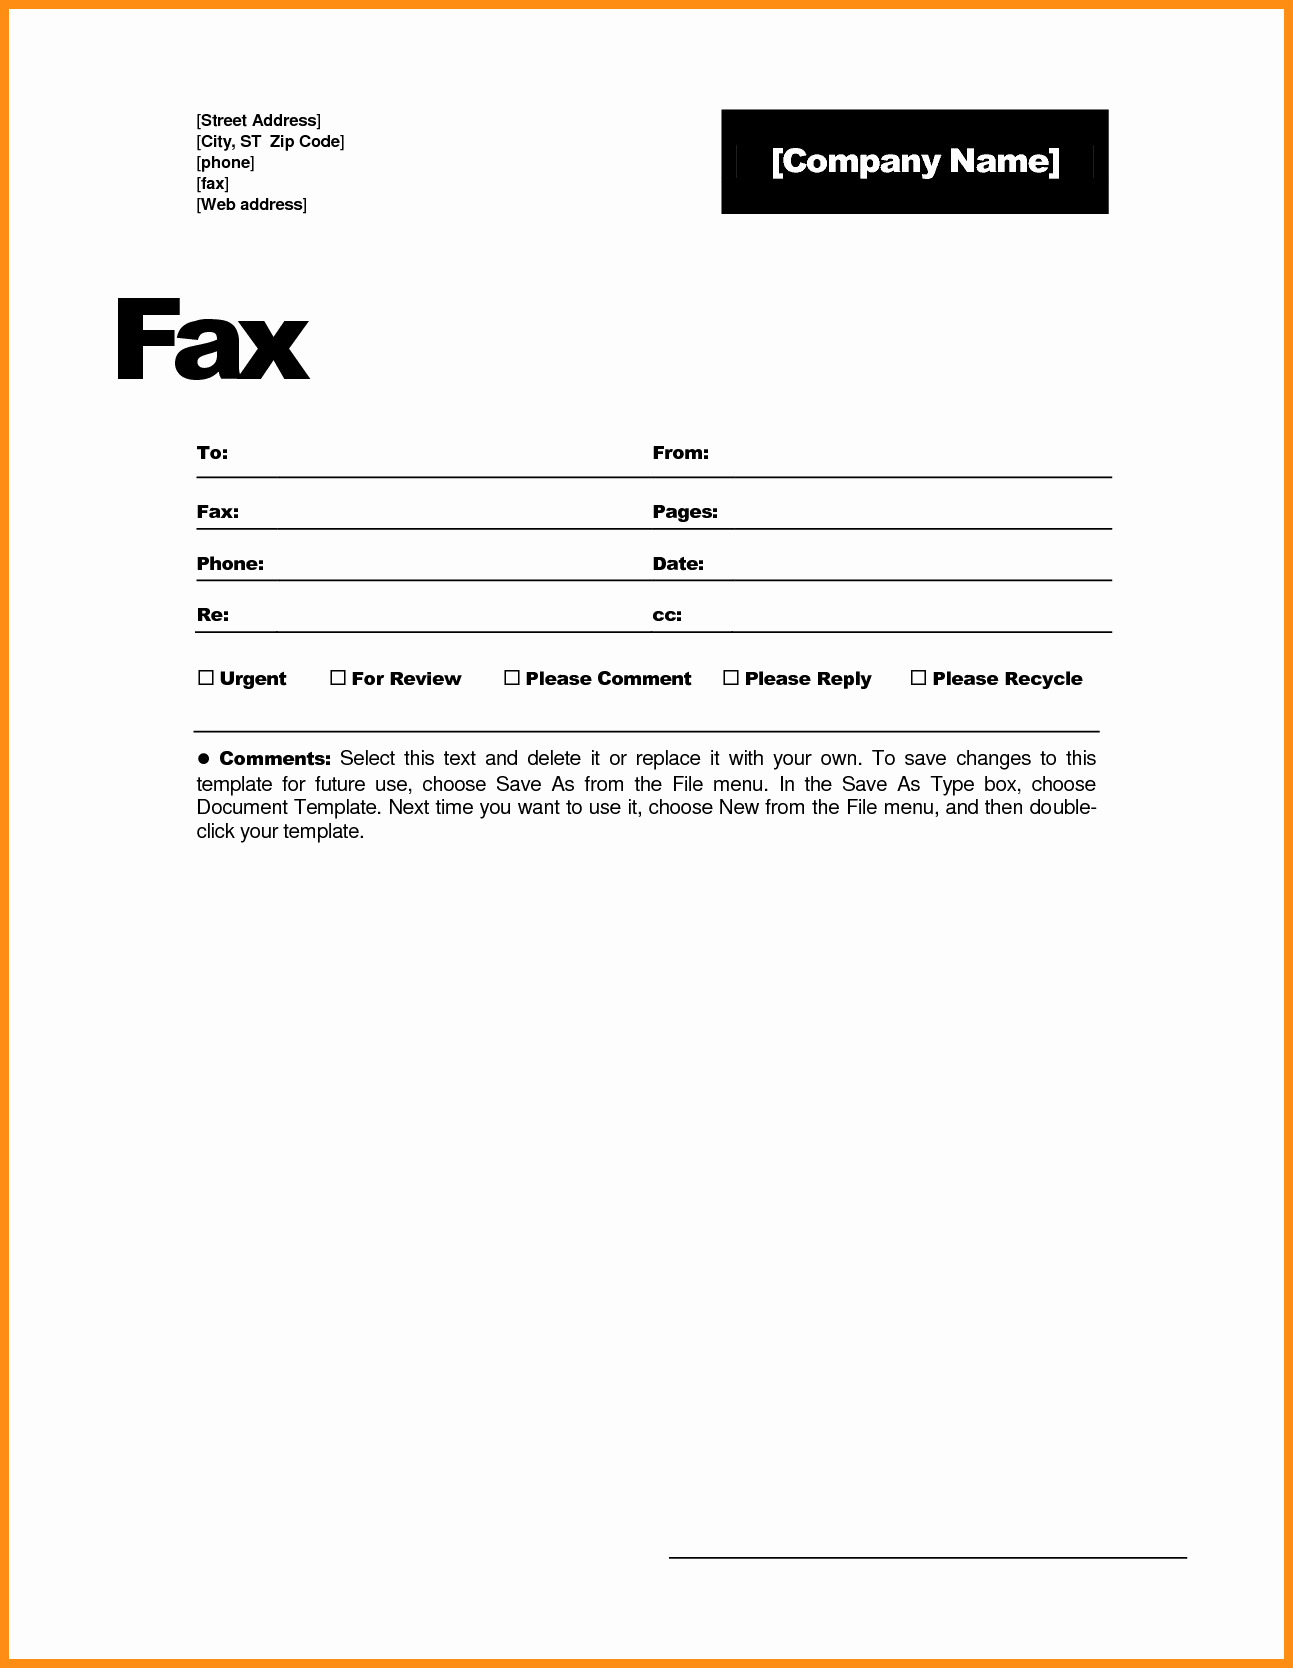 Fax Cover Sheet Word Template Lovely 6 Free Fax Cover Sheet Template Word